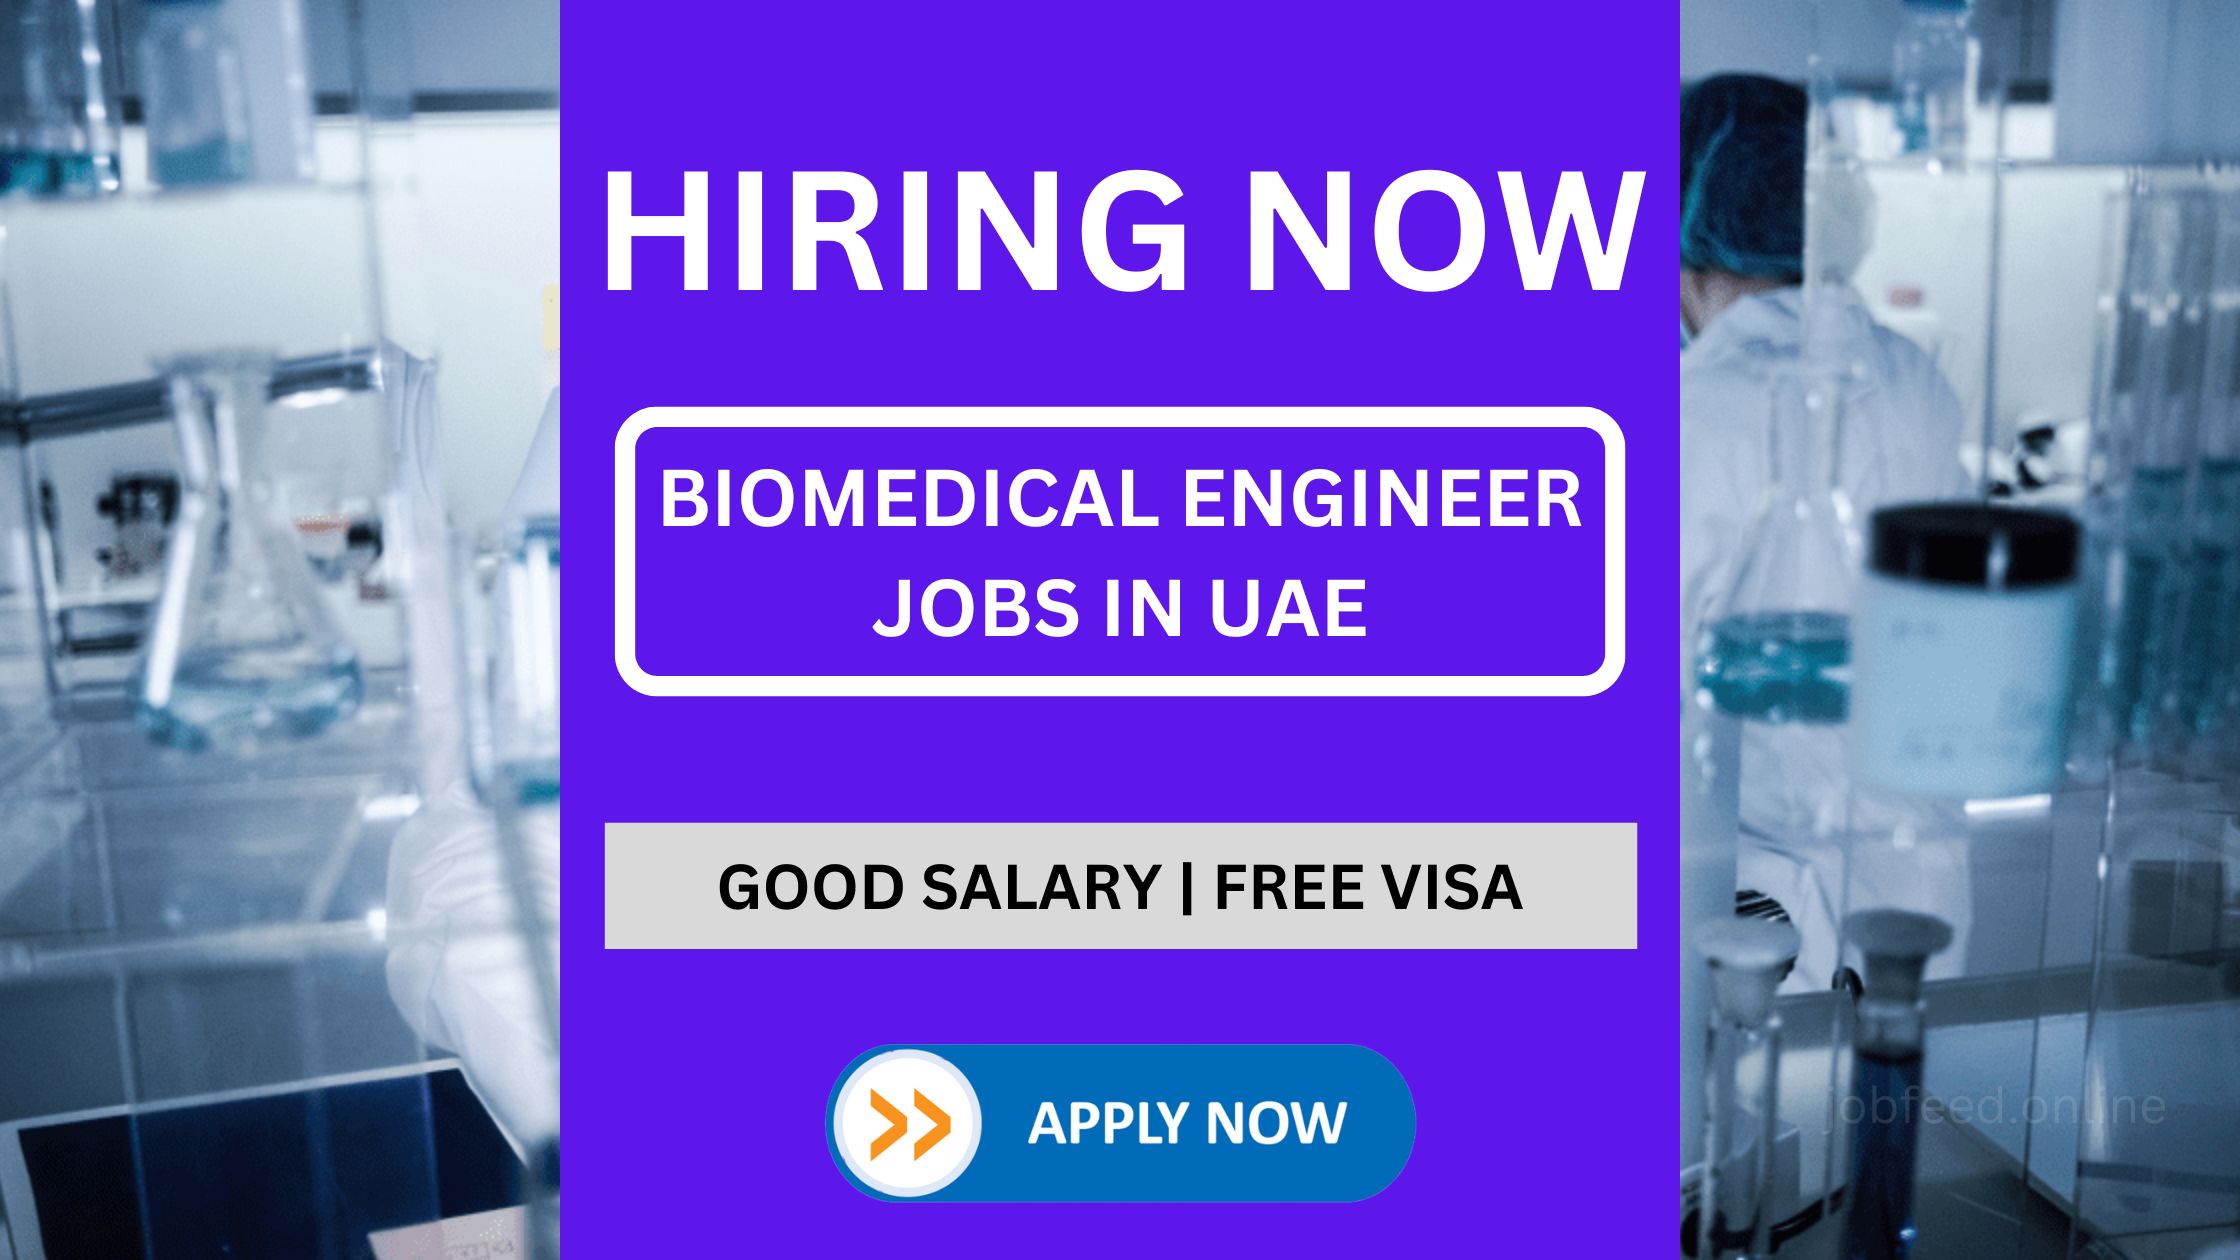 There is a job opening for a Biomedical Engineer in the UAE.